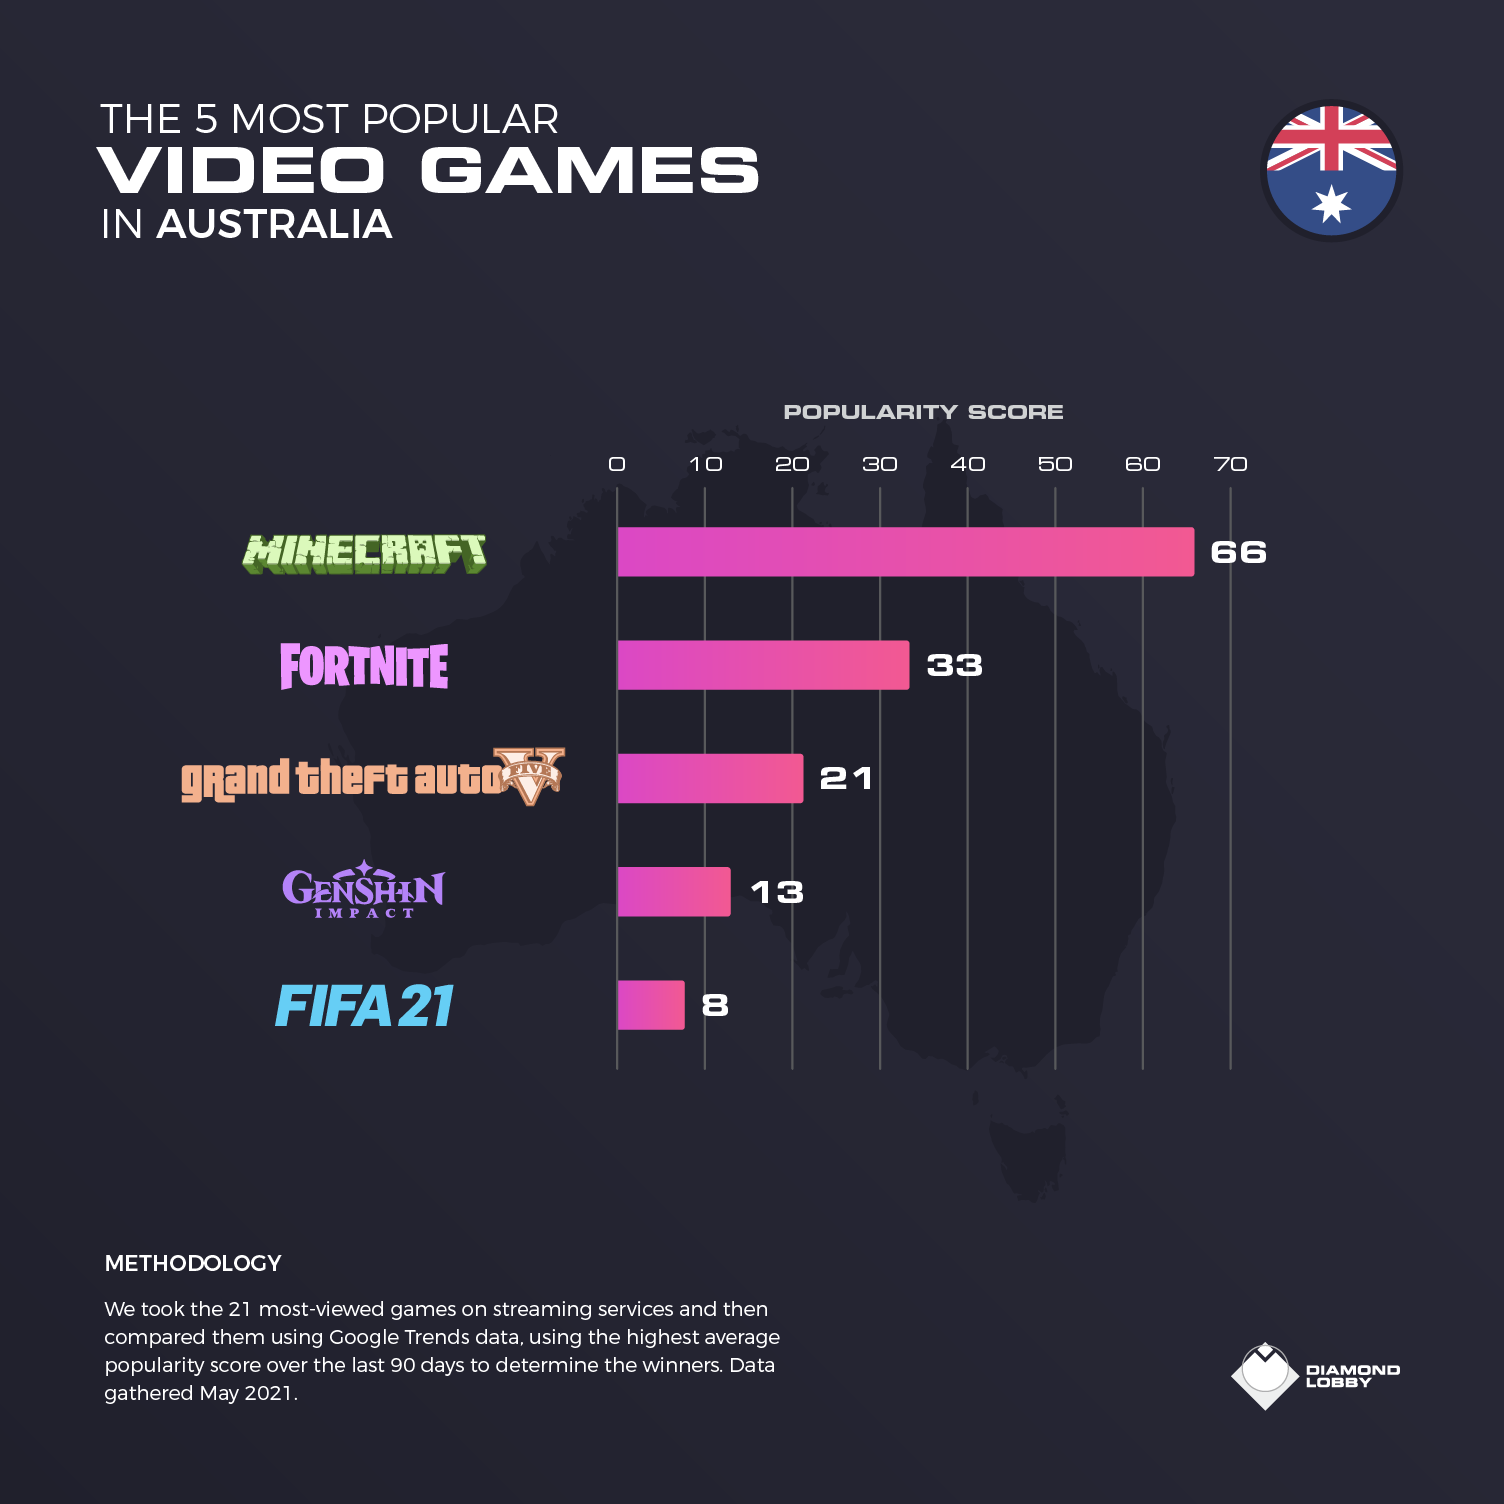 The top 5 video games in Australia